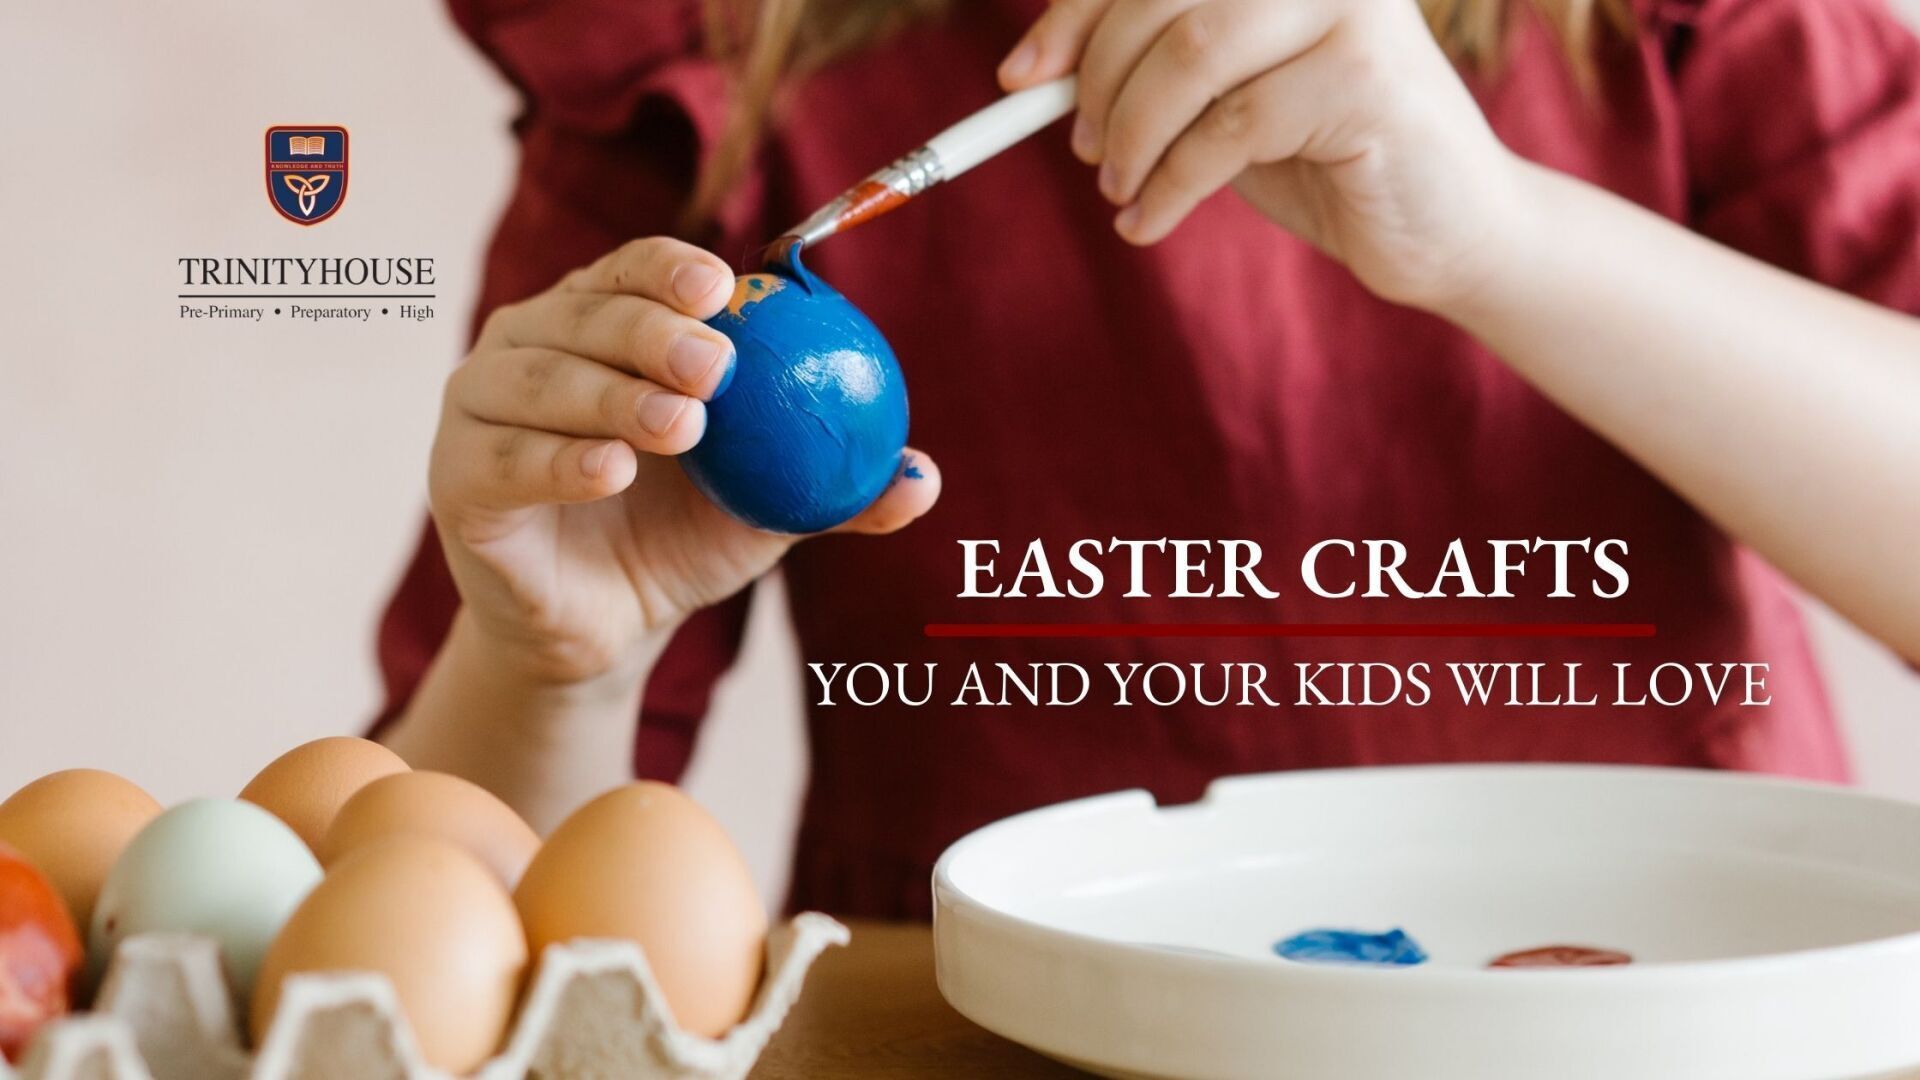 Kid painting and egg in blue paint, Easter crafts